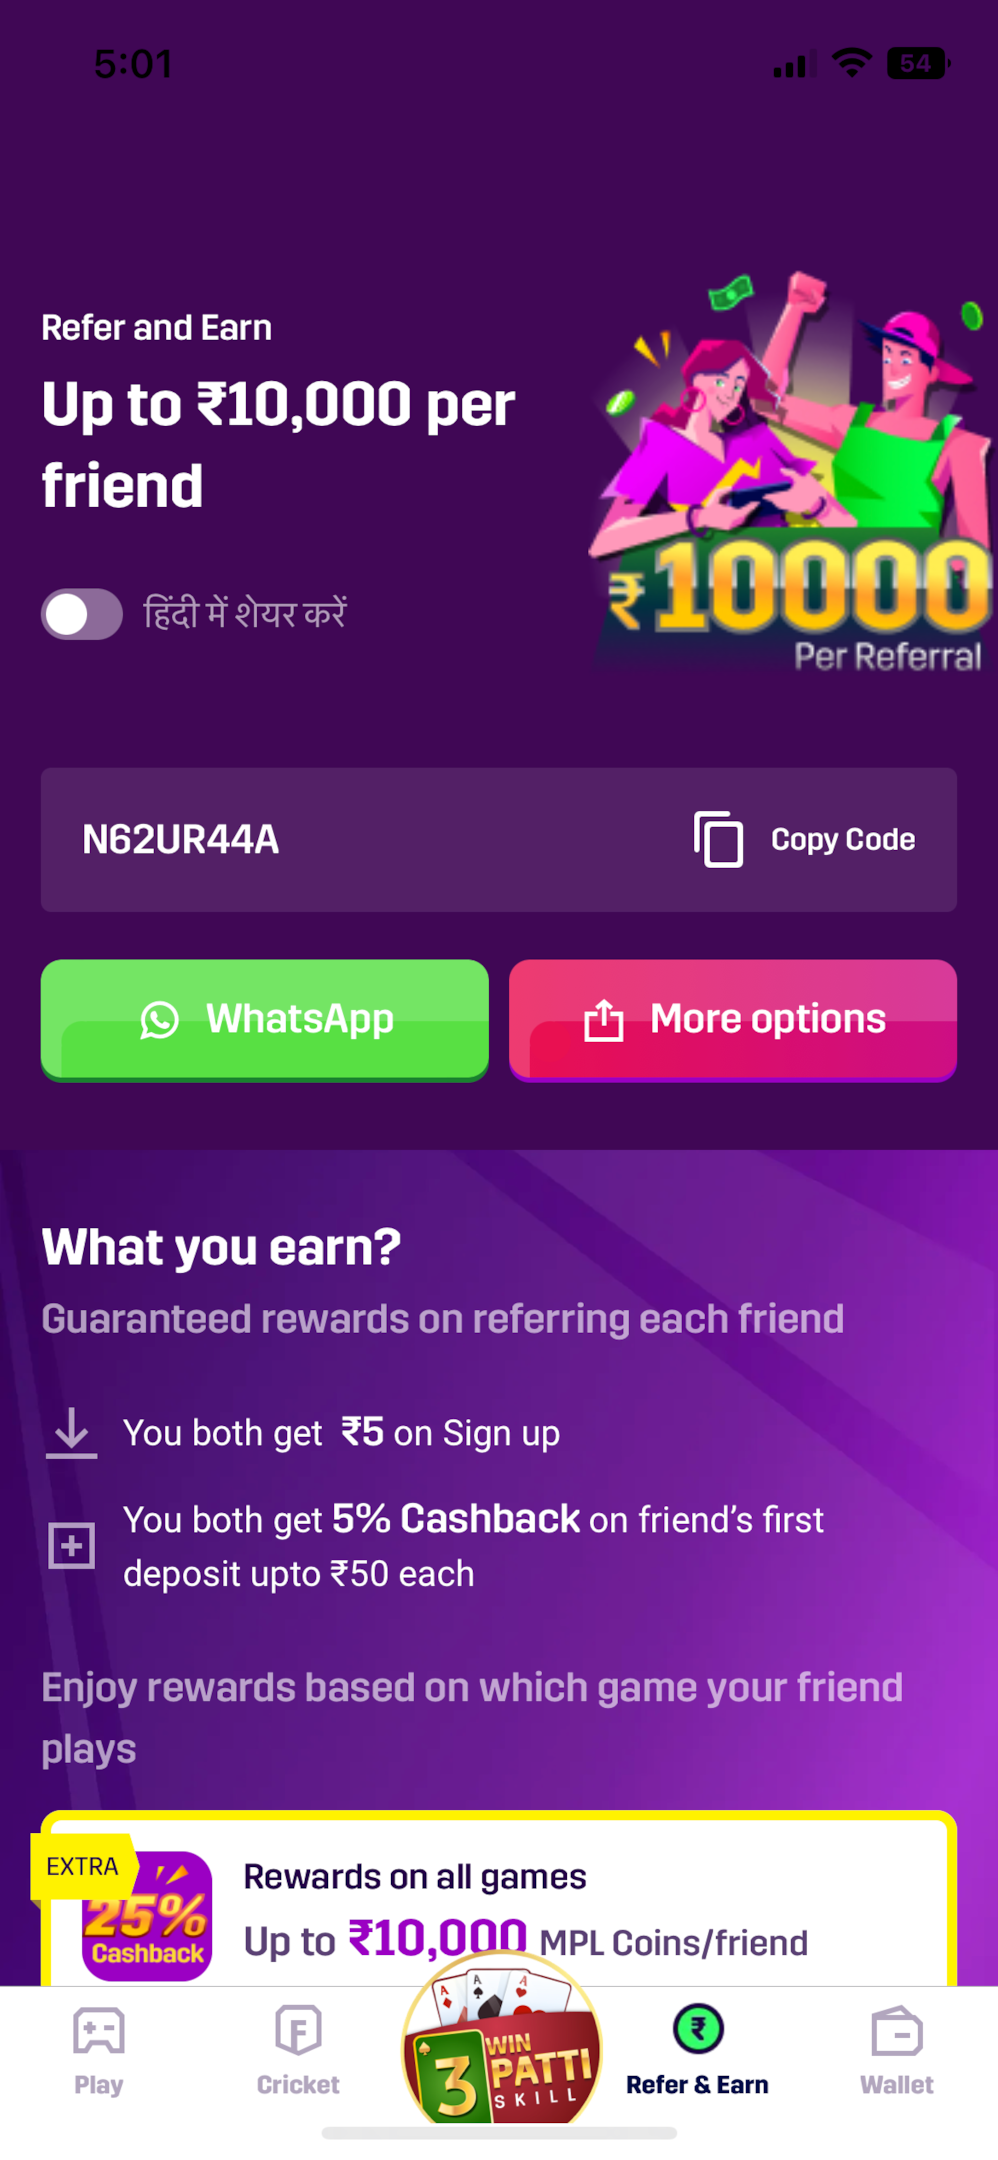 How to Refer and Earn Money from App? Complete Guide | IDFC FIRST Bank